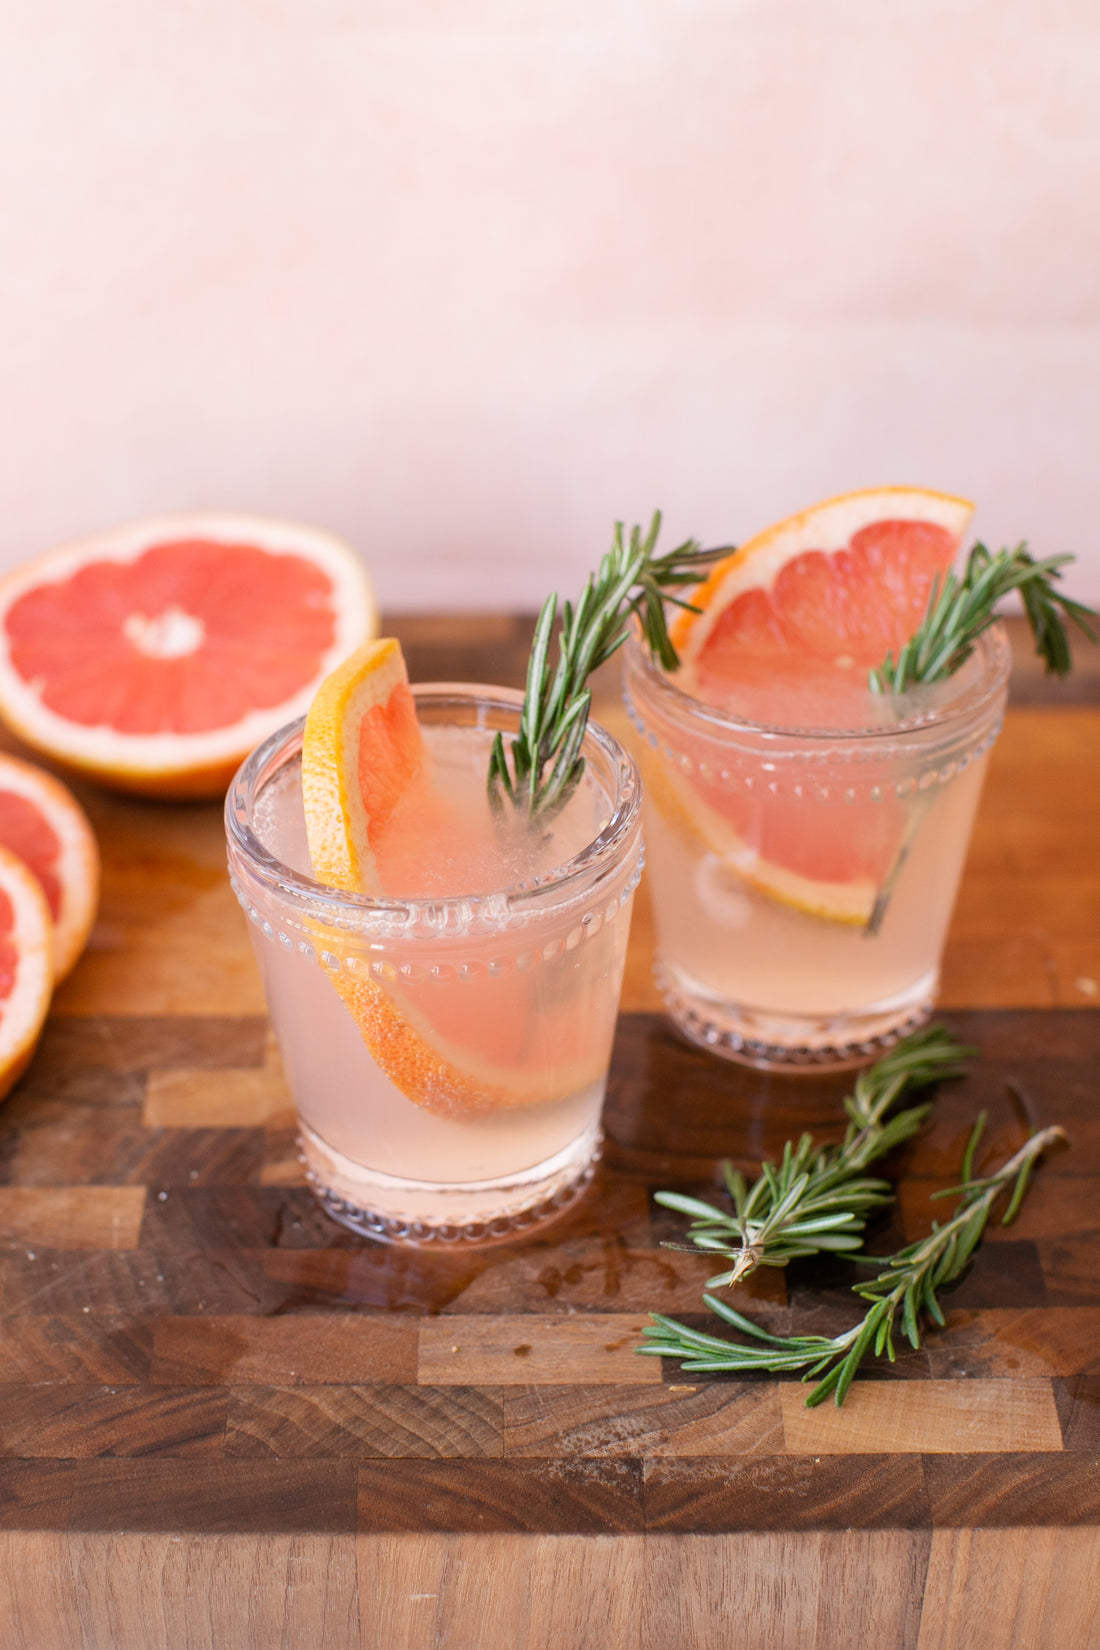 Grapefruit Gin & Tonic with Rosemary Simple Syrup